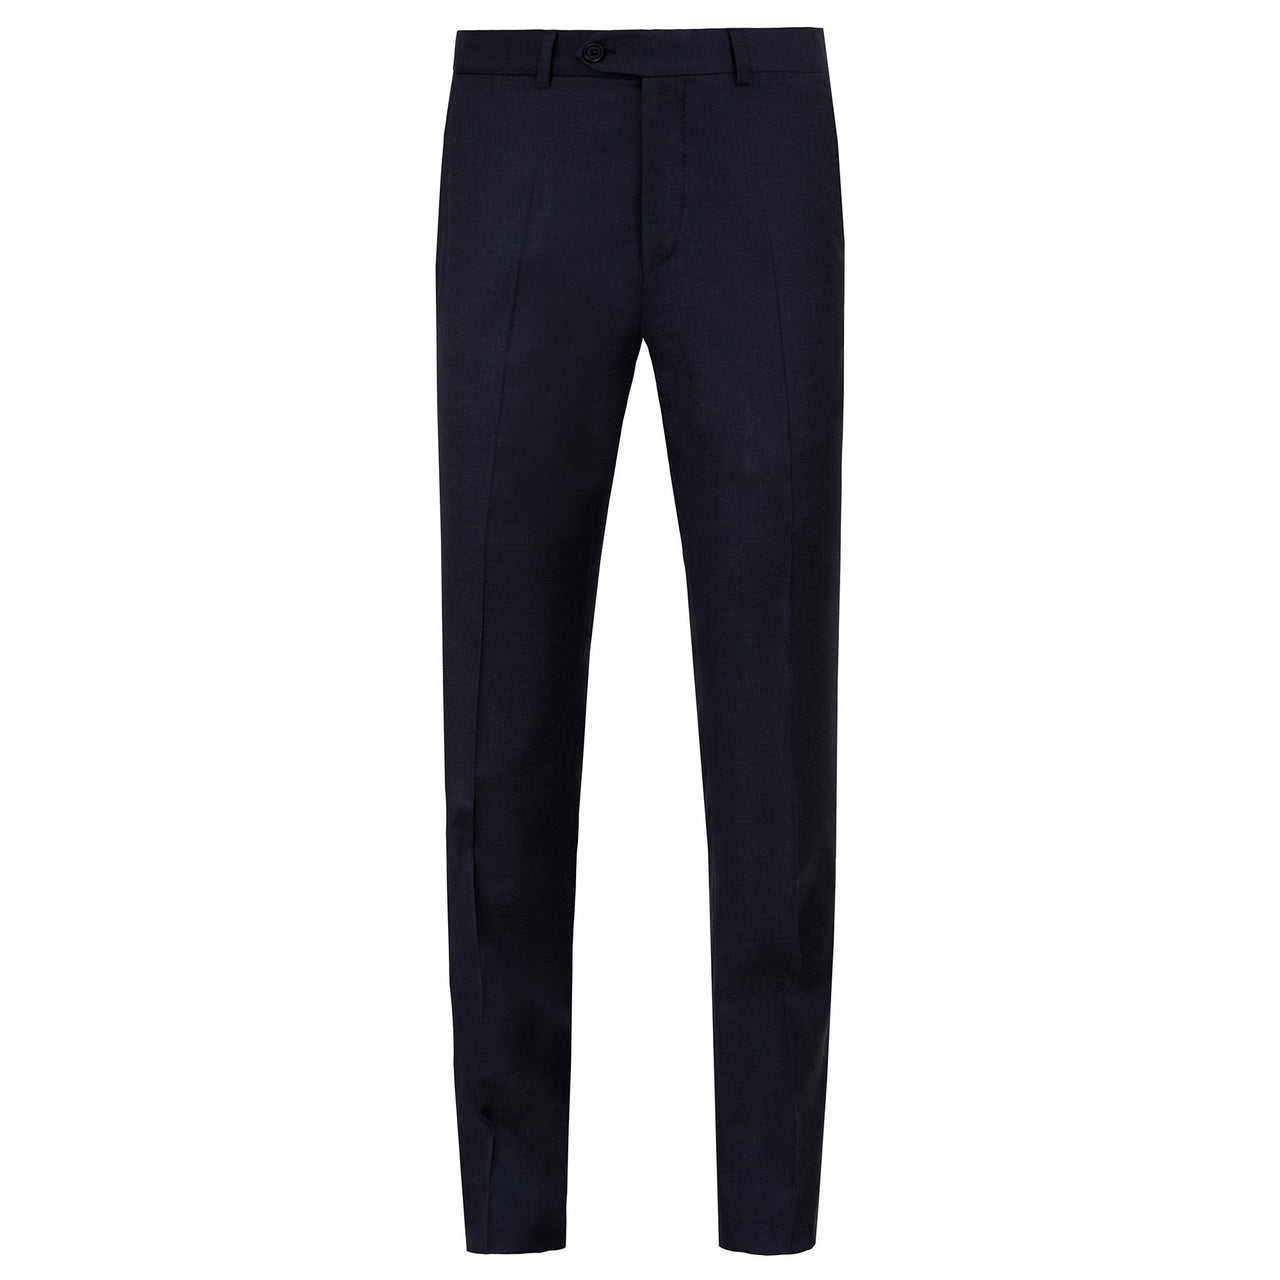 HENRY SARTORIAL Lux Twill Trousers CHARCOAL